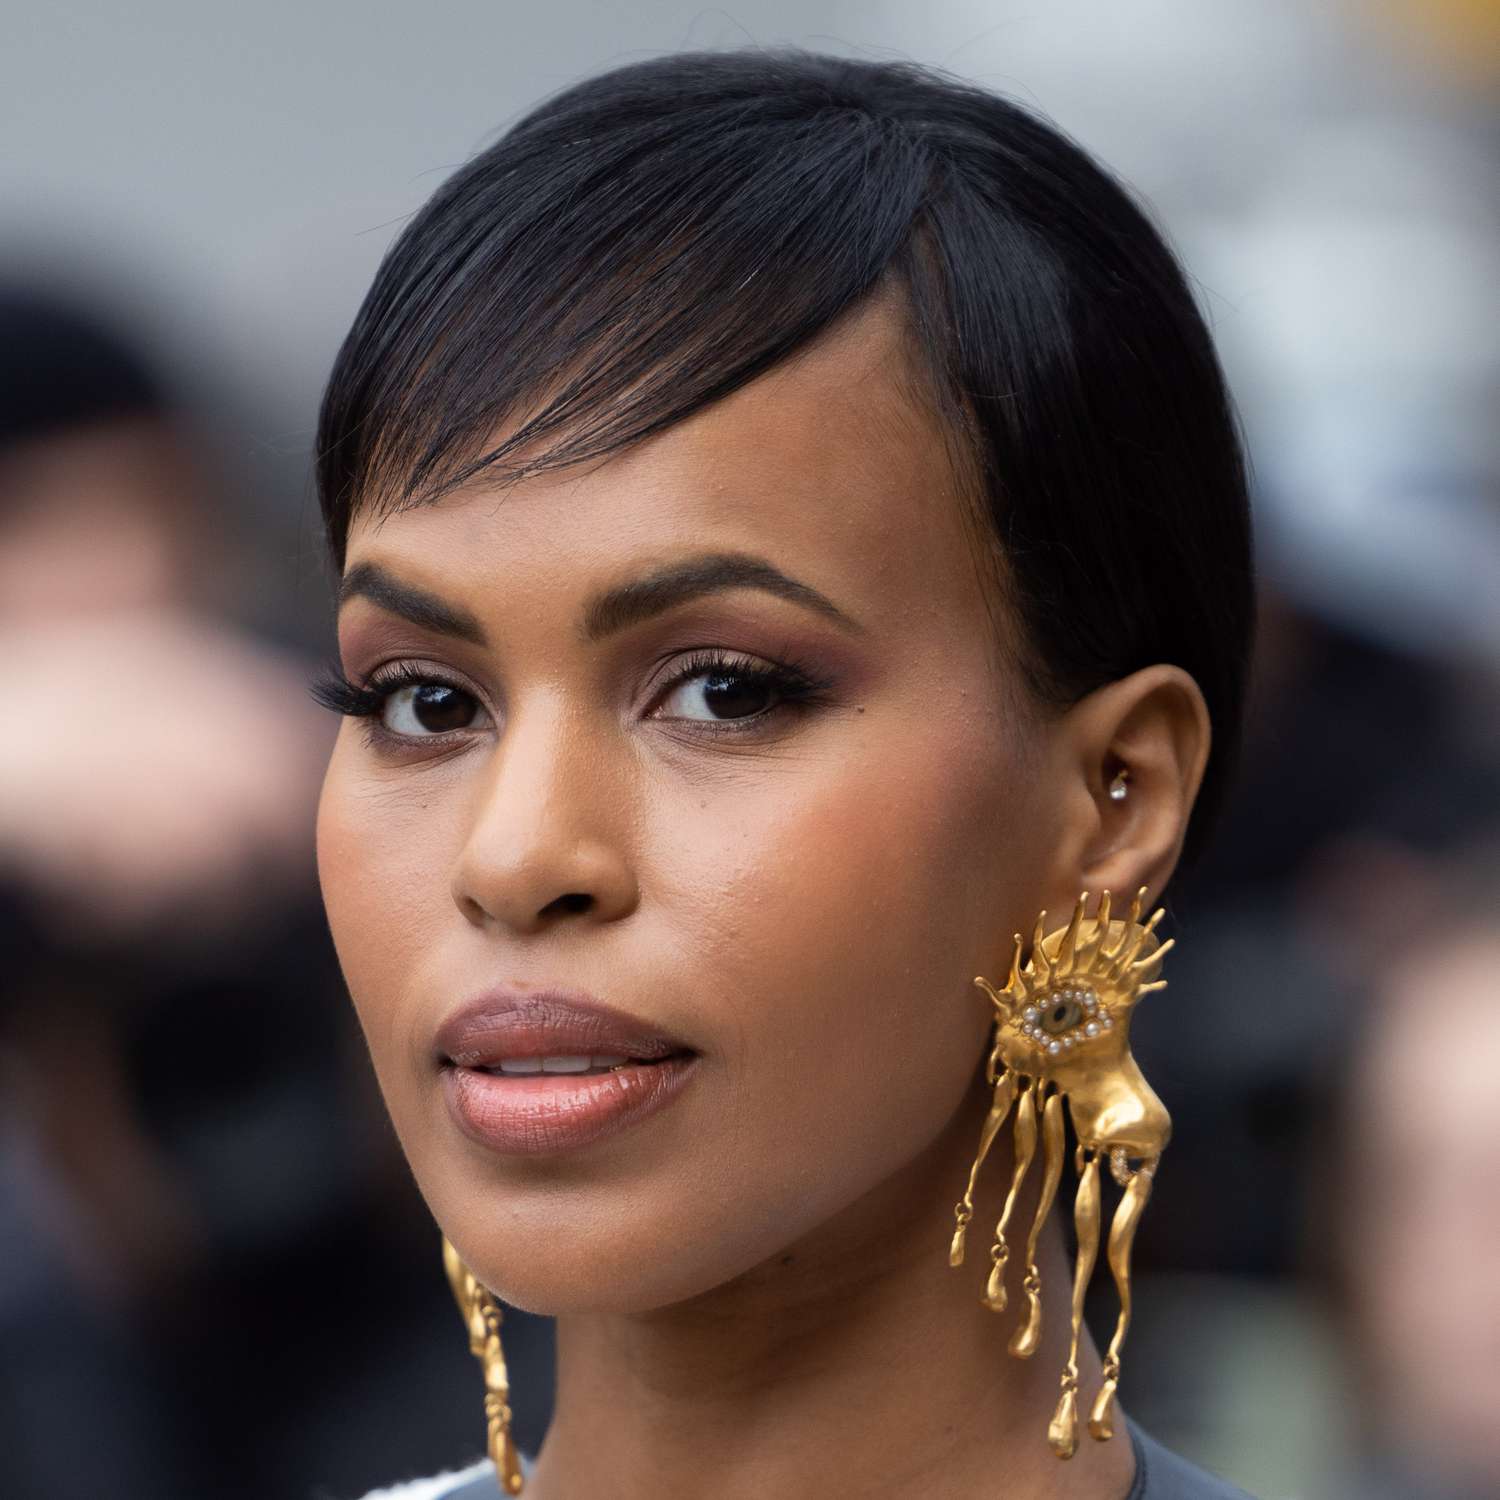 Sabrina Dhowre Elba attends Paris Fashion Week with a softly feathered side bang and sleek pixie